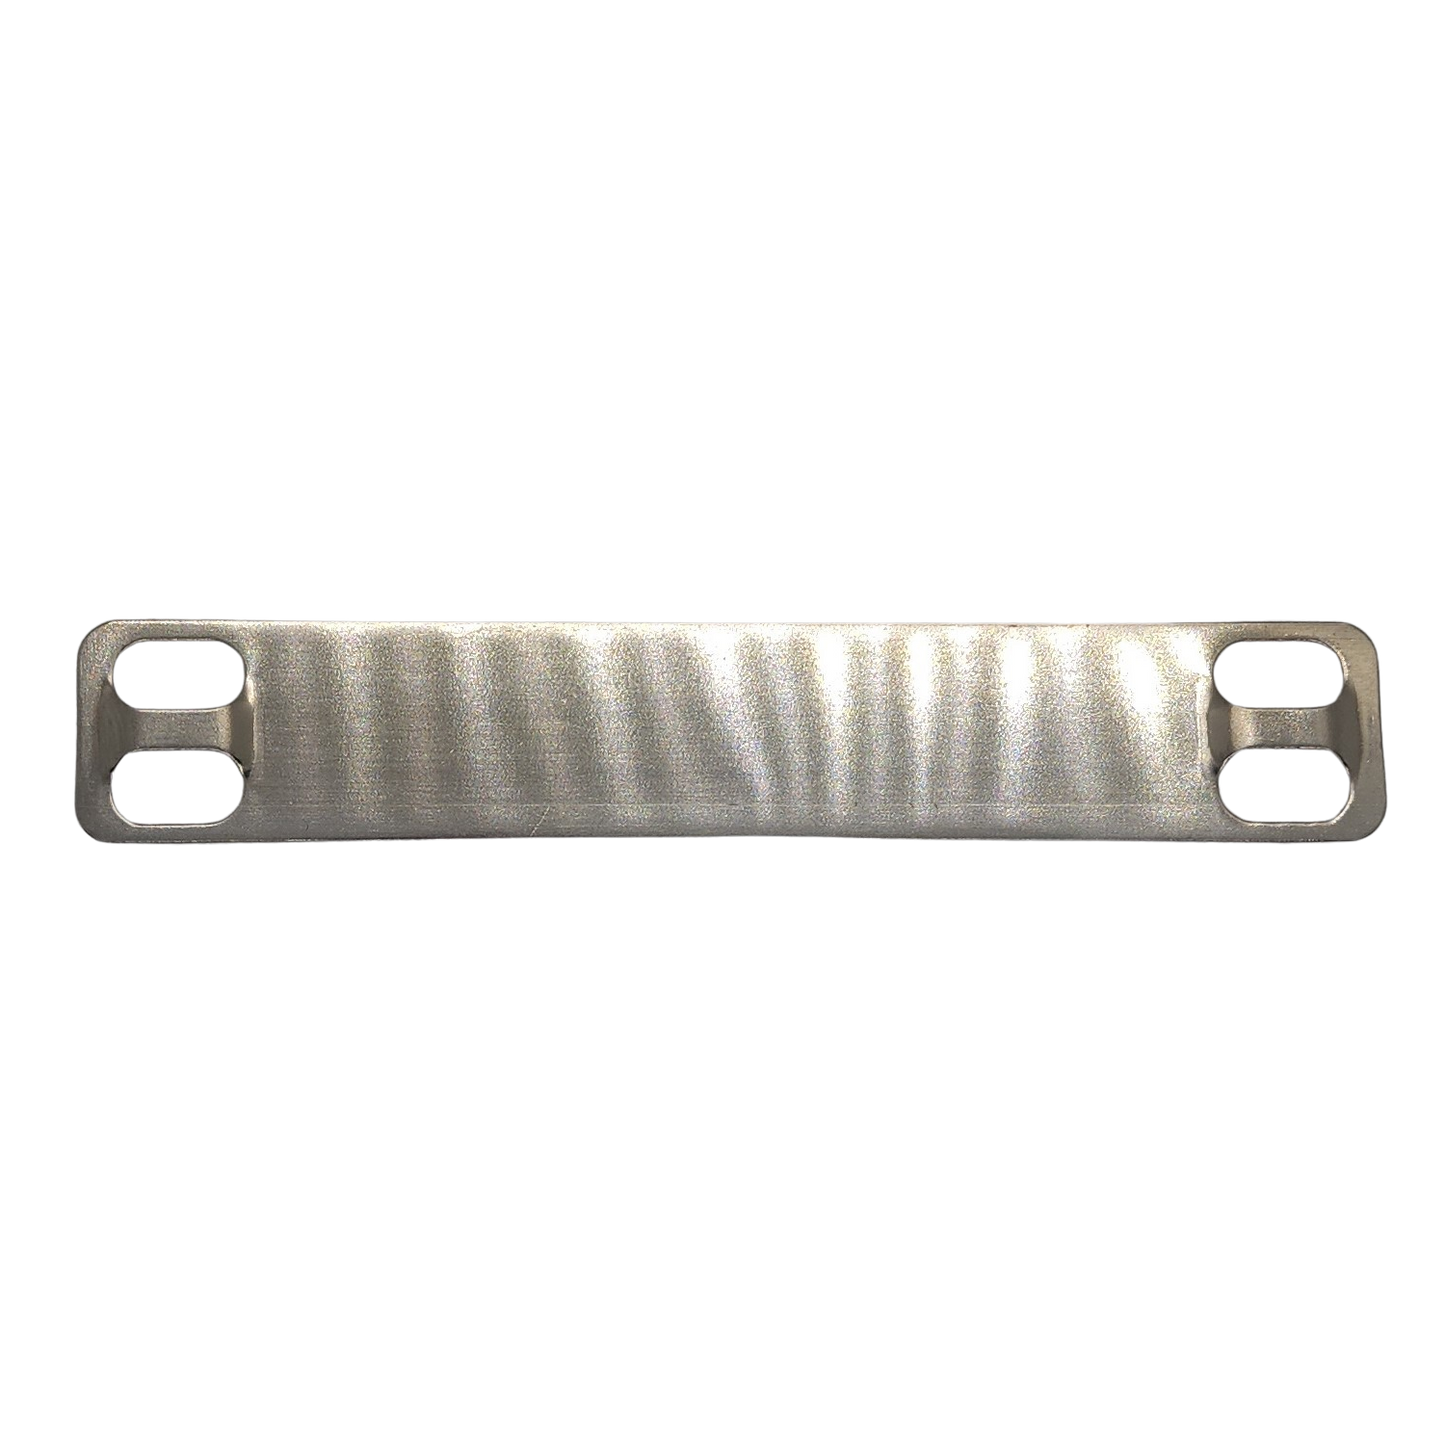 4" x 3/4" 316 Stainless Steel Tag